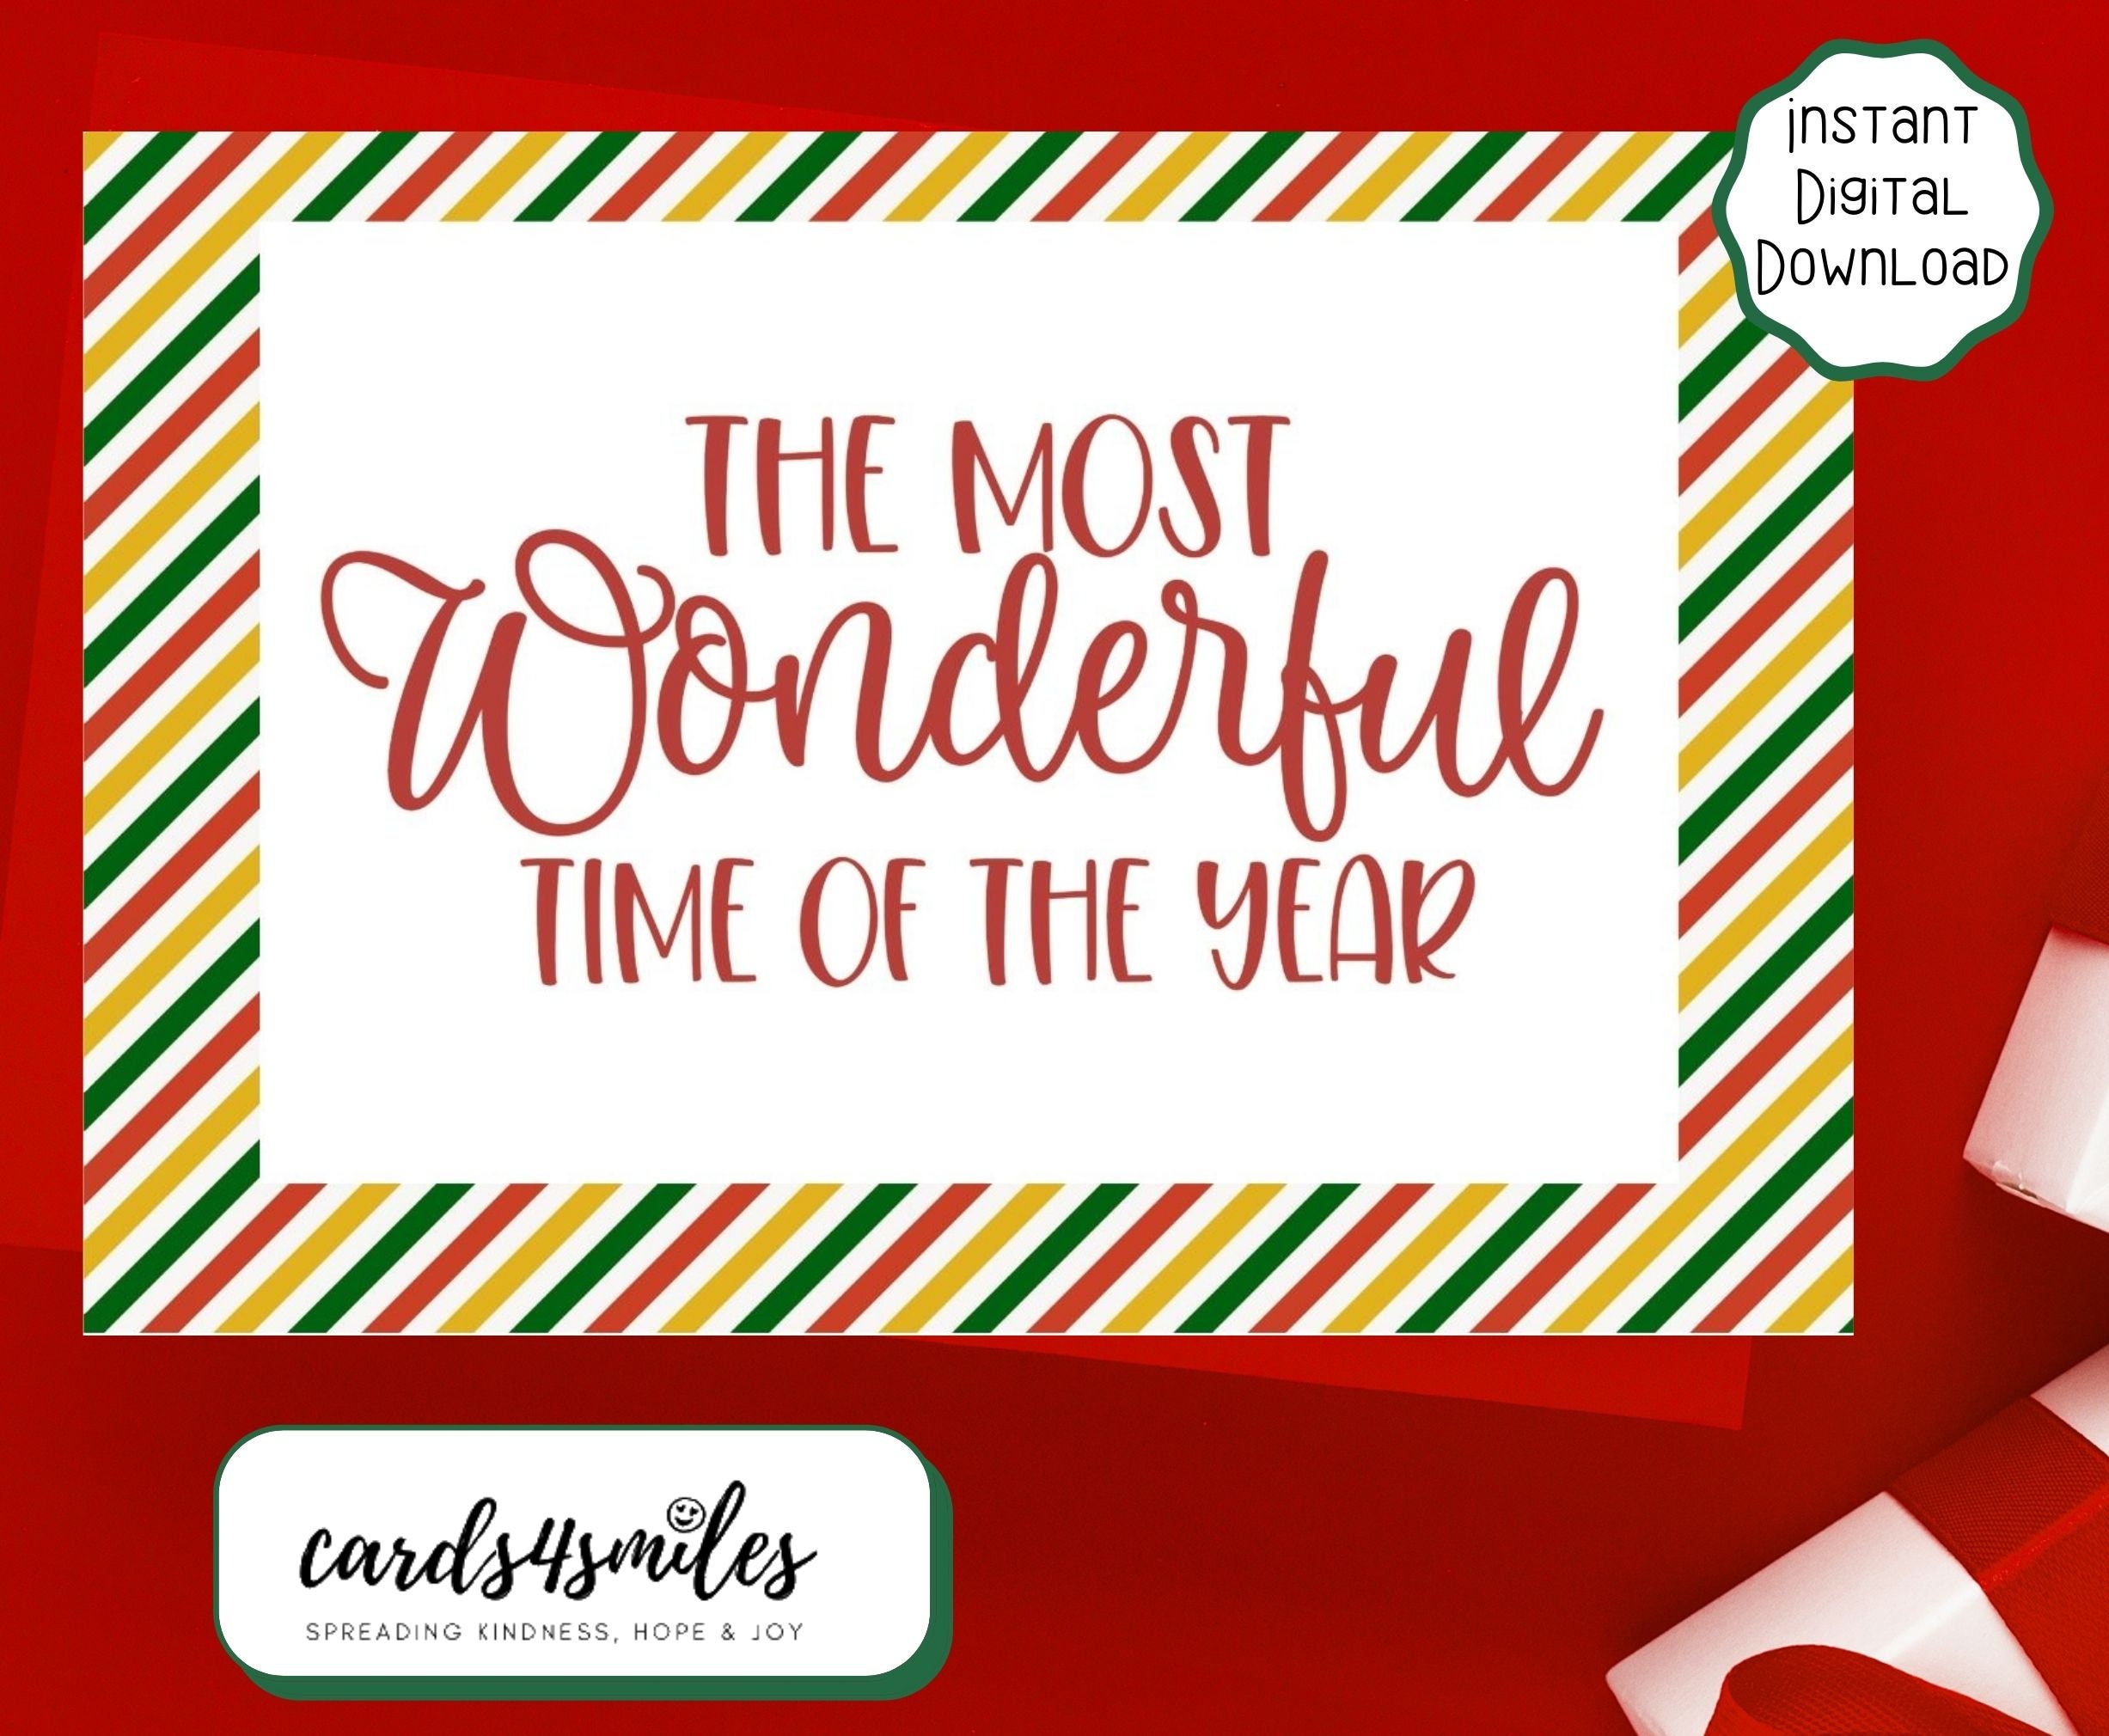 The Most Wonderful time of the year Printable Card Instant Download 7X5 inch Christmas Card Christmas trees Fir Trees